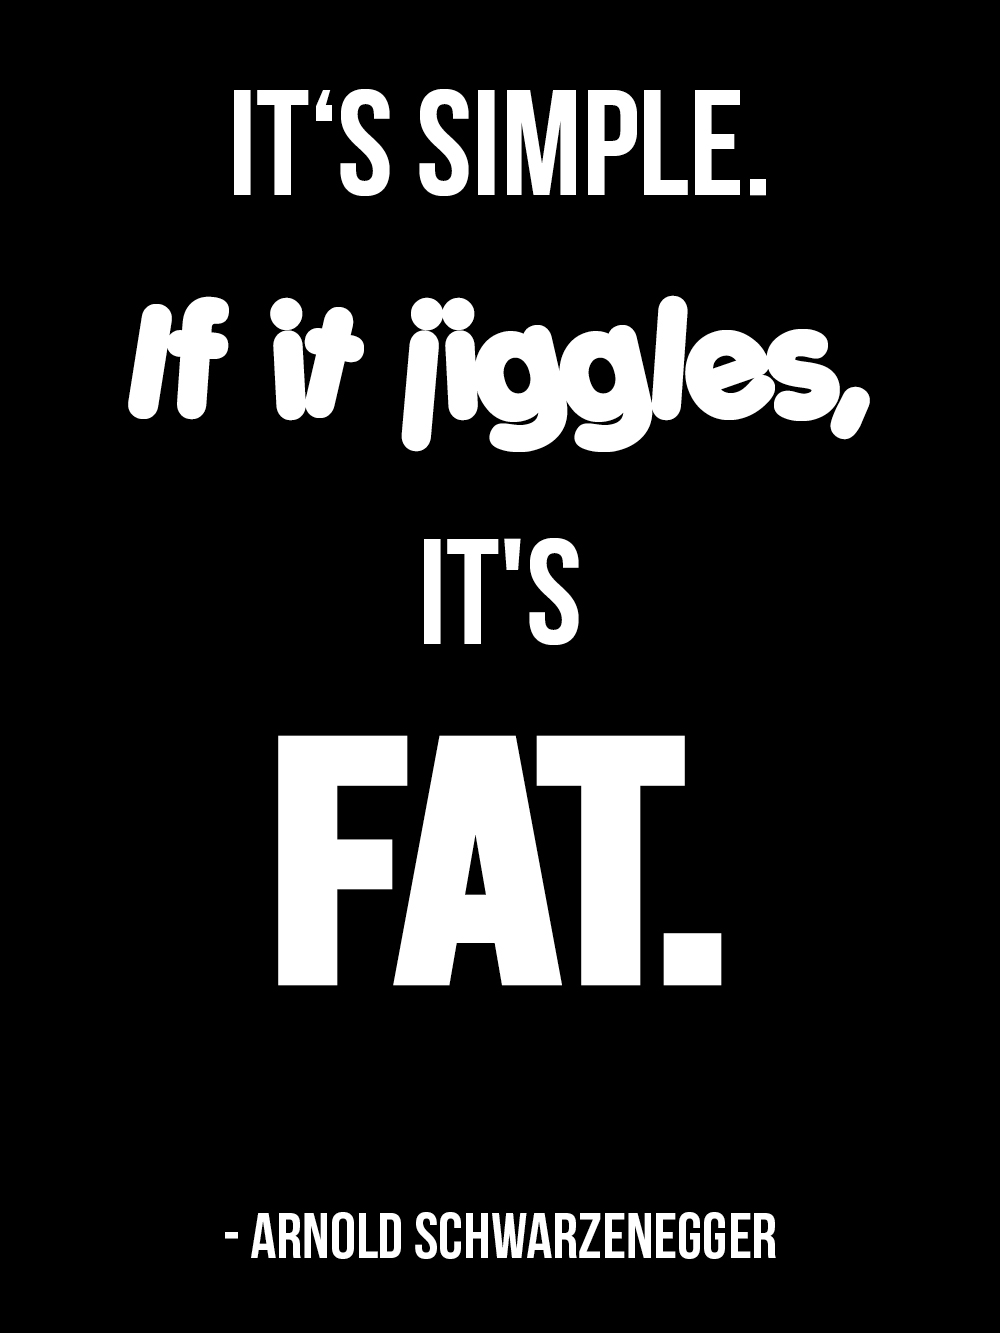 Fat Muscle Quotes. QuotesGram